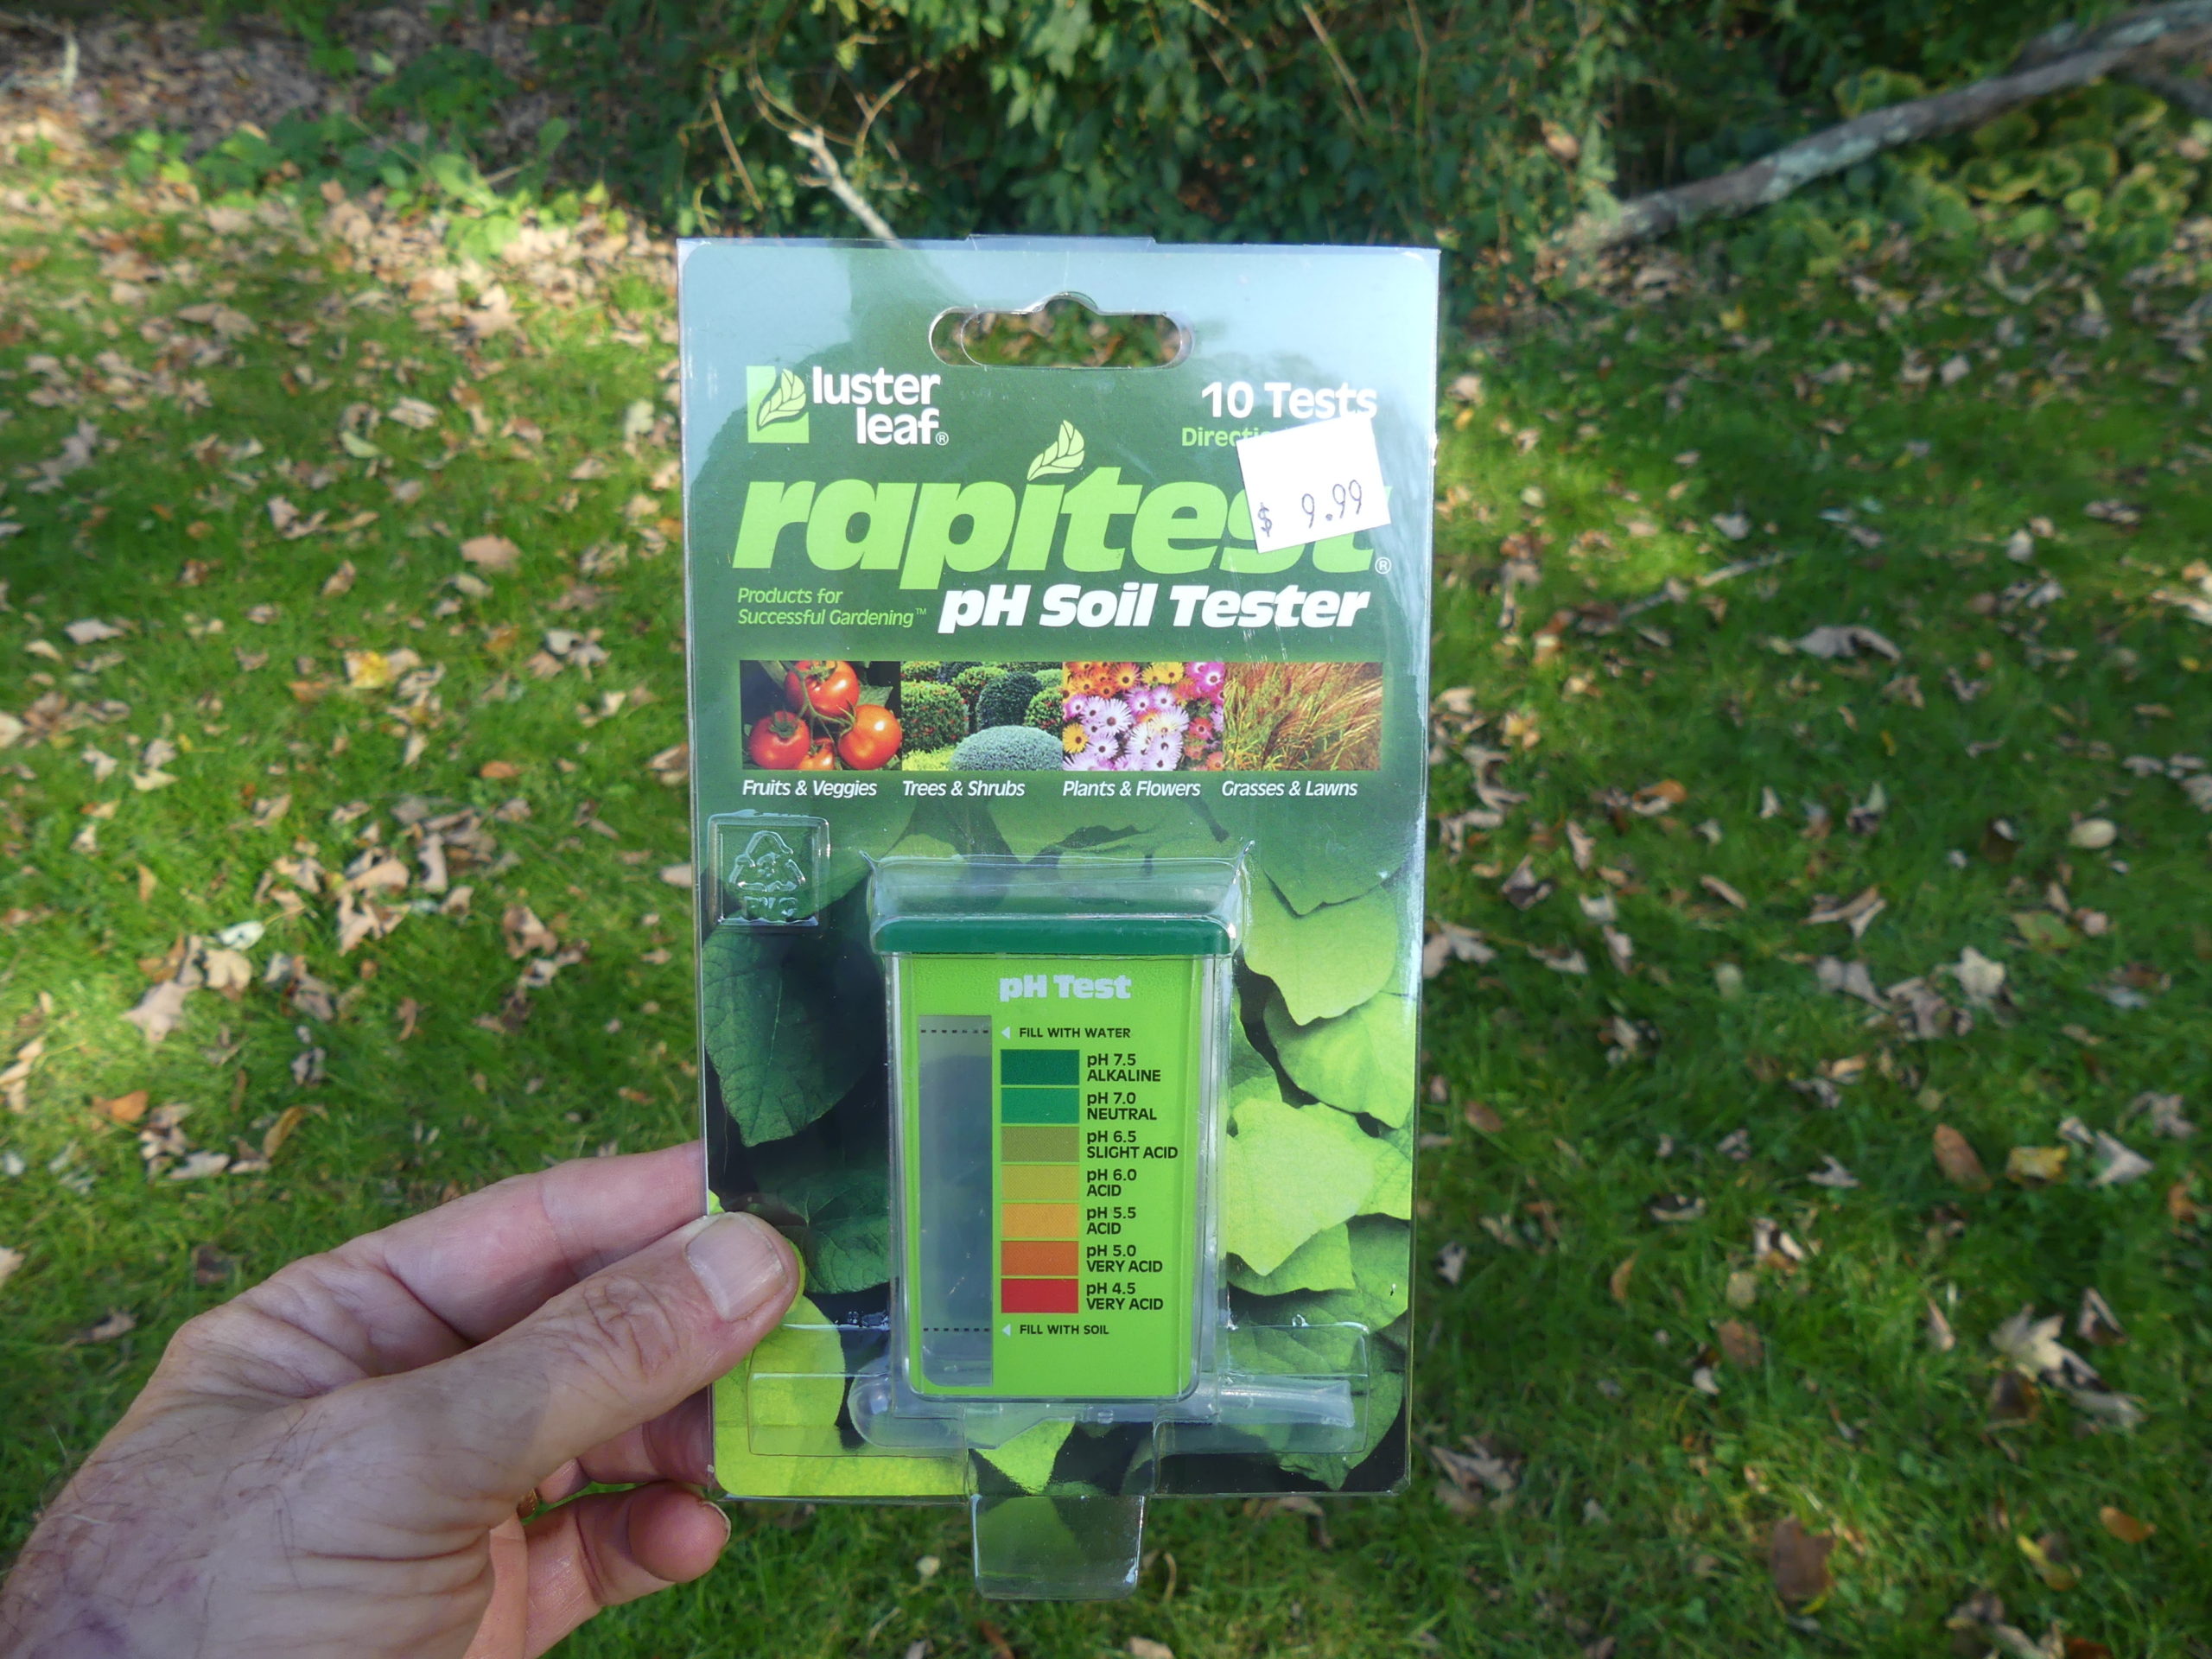 This is the perfect time to test your soil pH. Inexpensive kits like this one cost about $10 for ten tests. Remember to test several spots in your lawn, your vegetable garden and your landscape beds. ANDREW MESSINGER